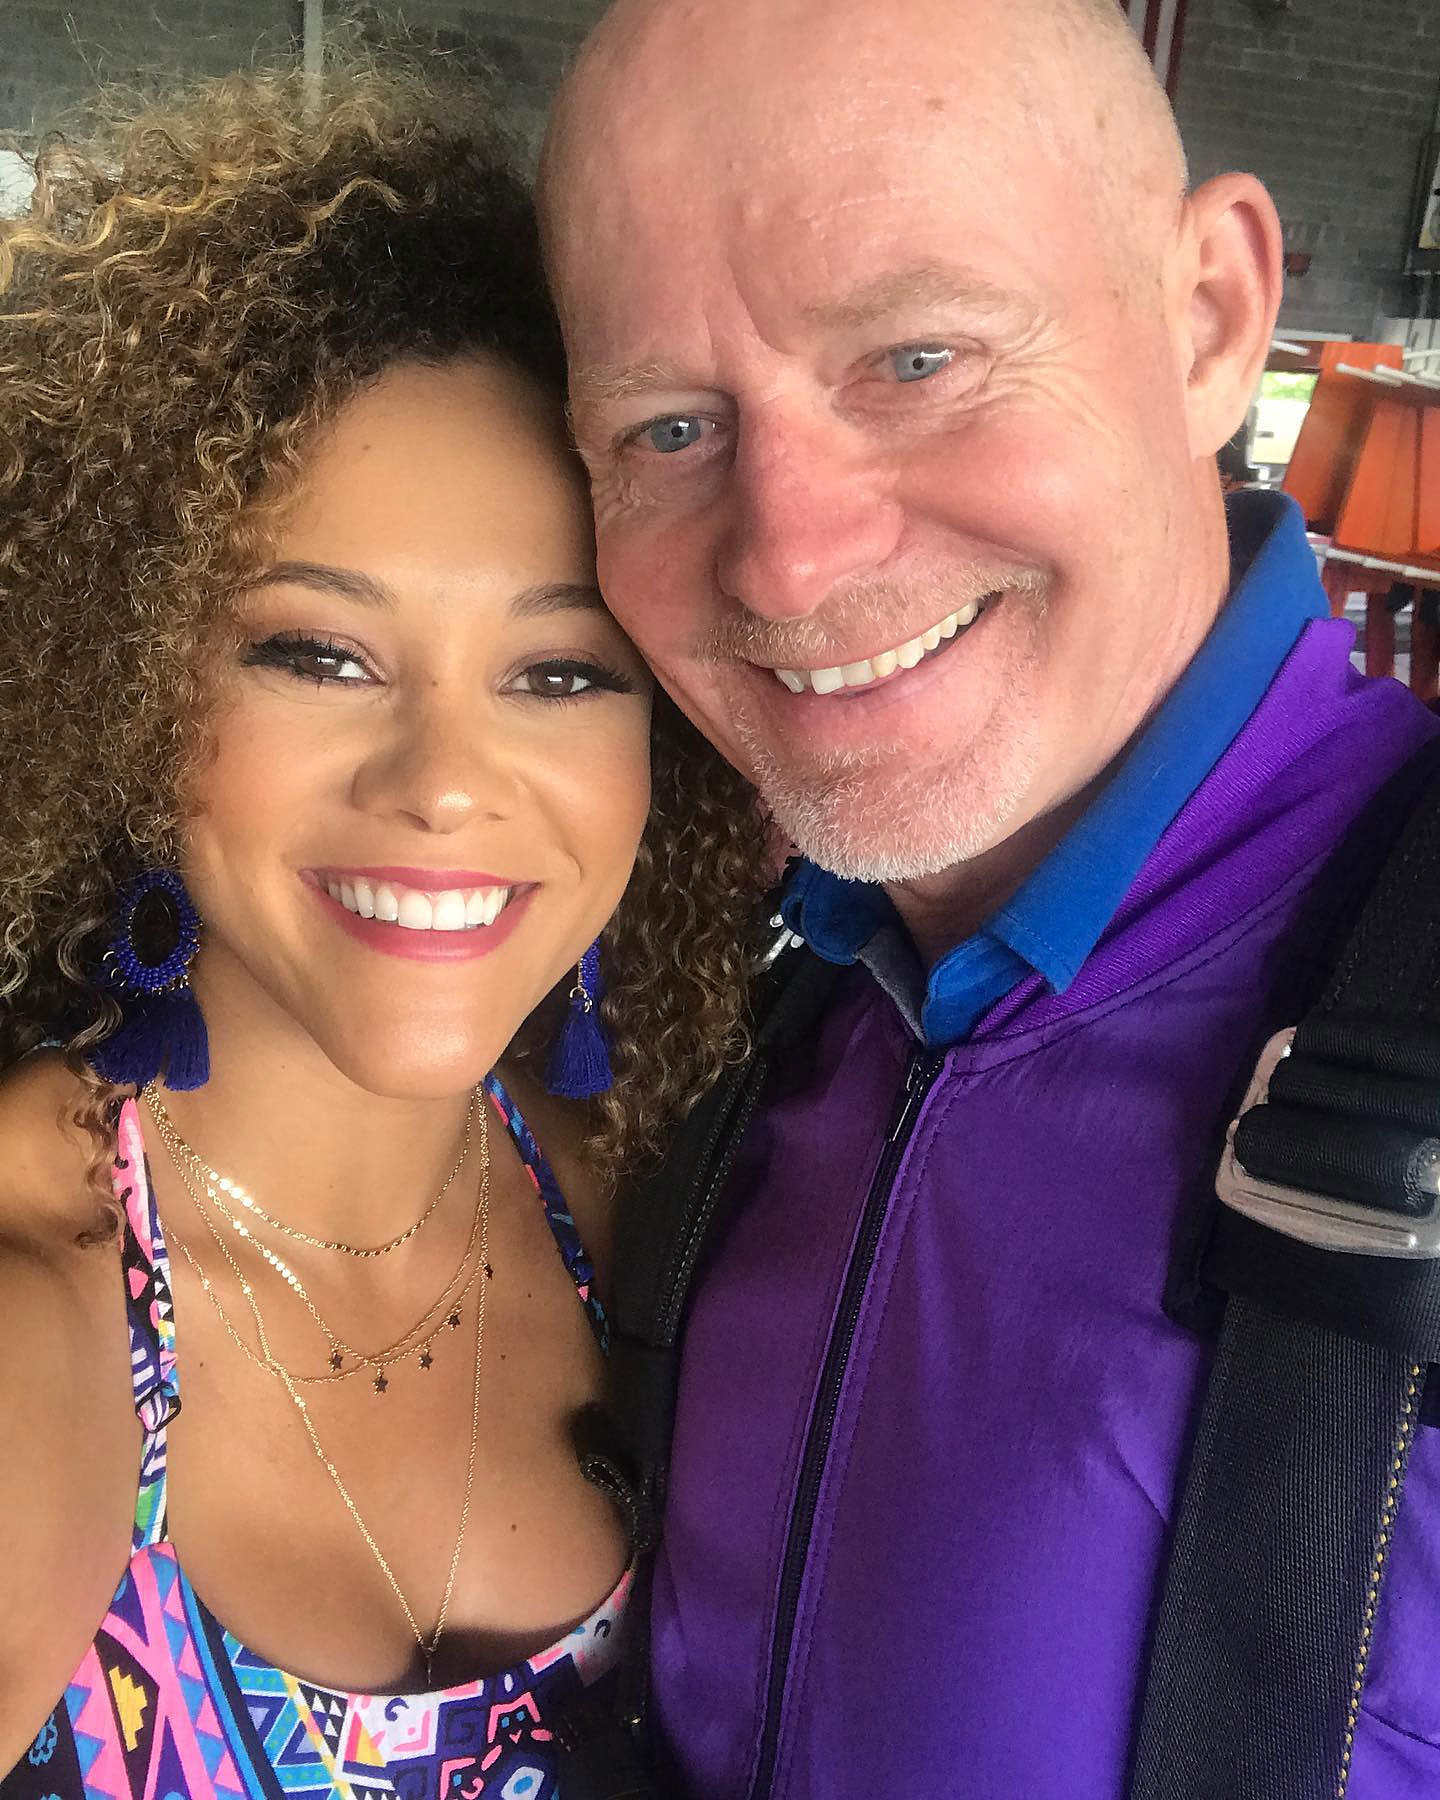 RHOP's Ashley, Michael Darby's Timeline: Prenup, Cheating Scandals